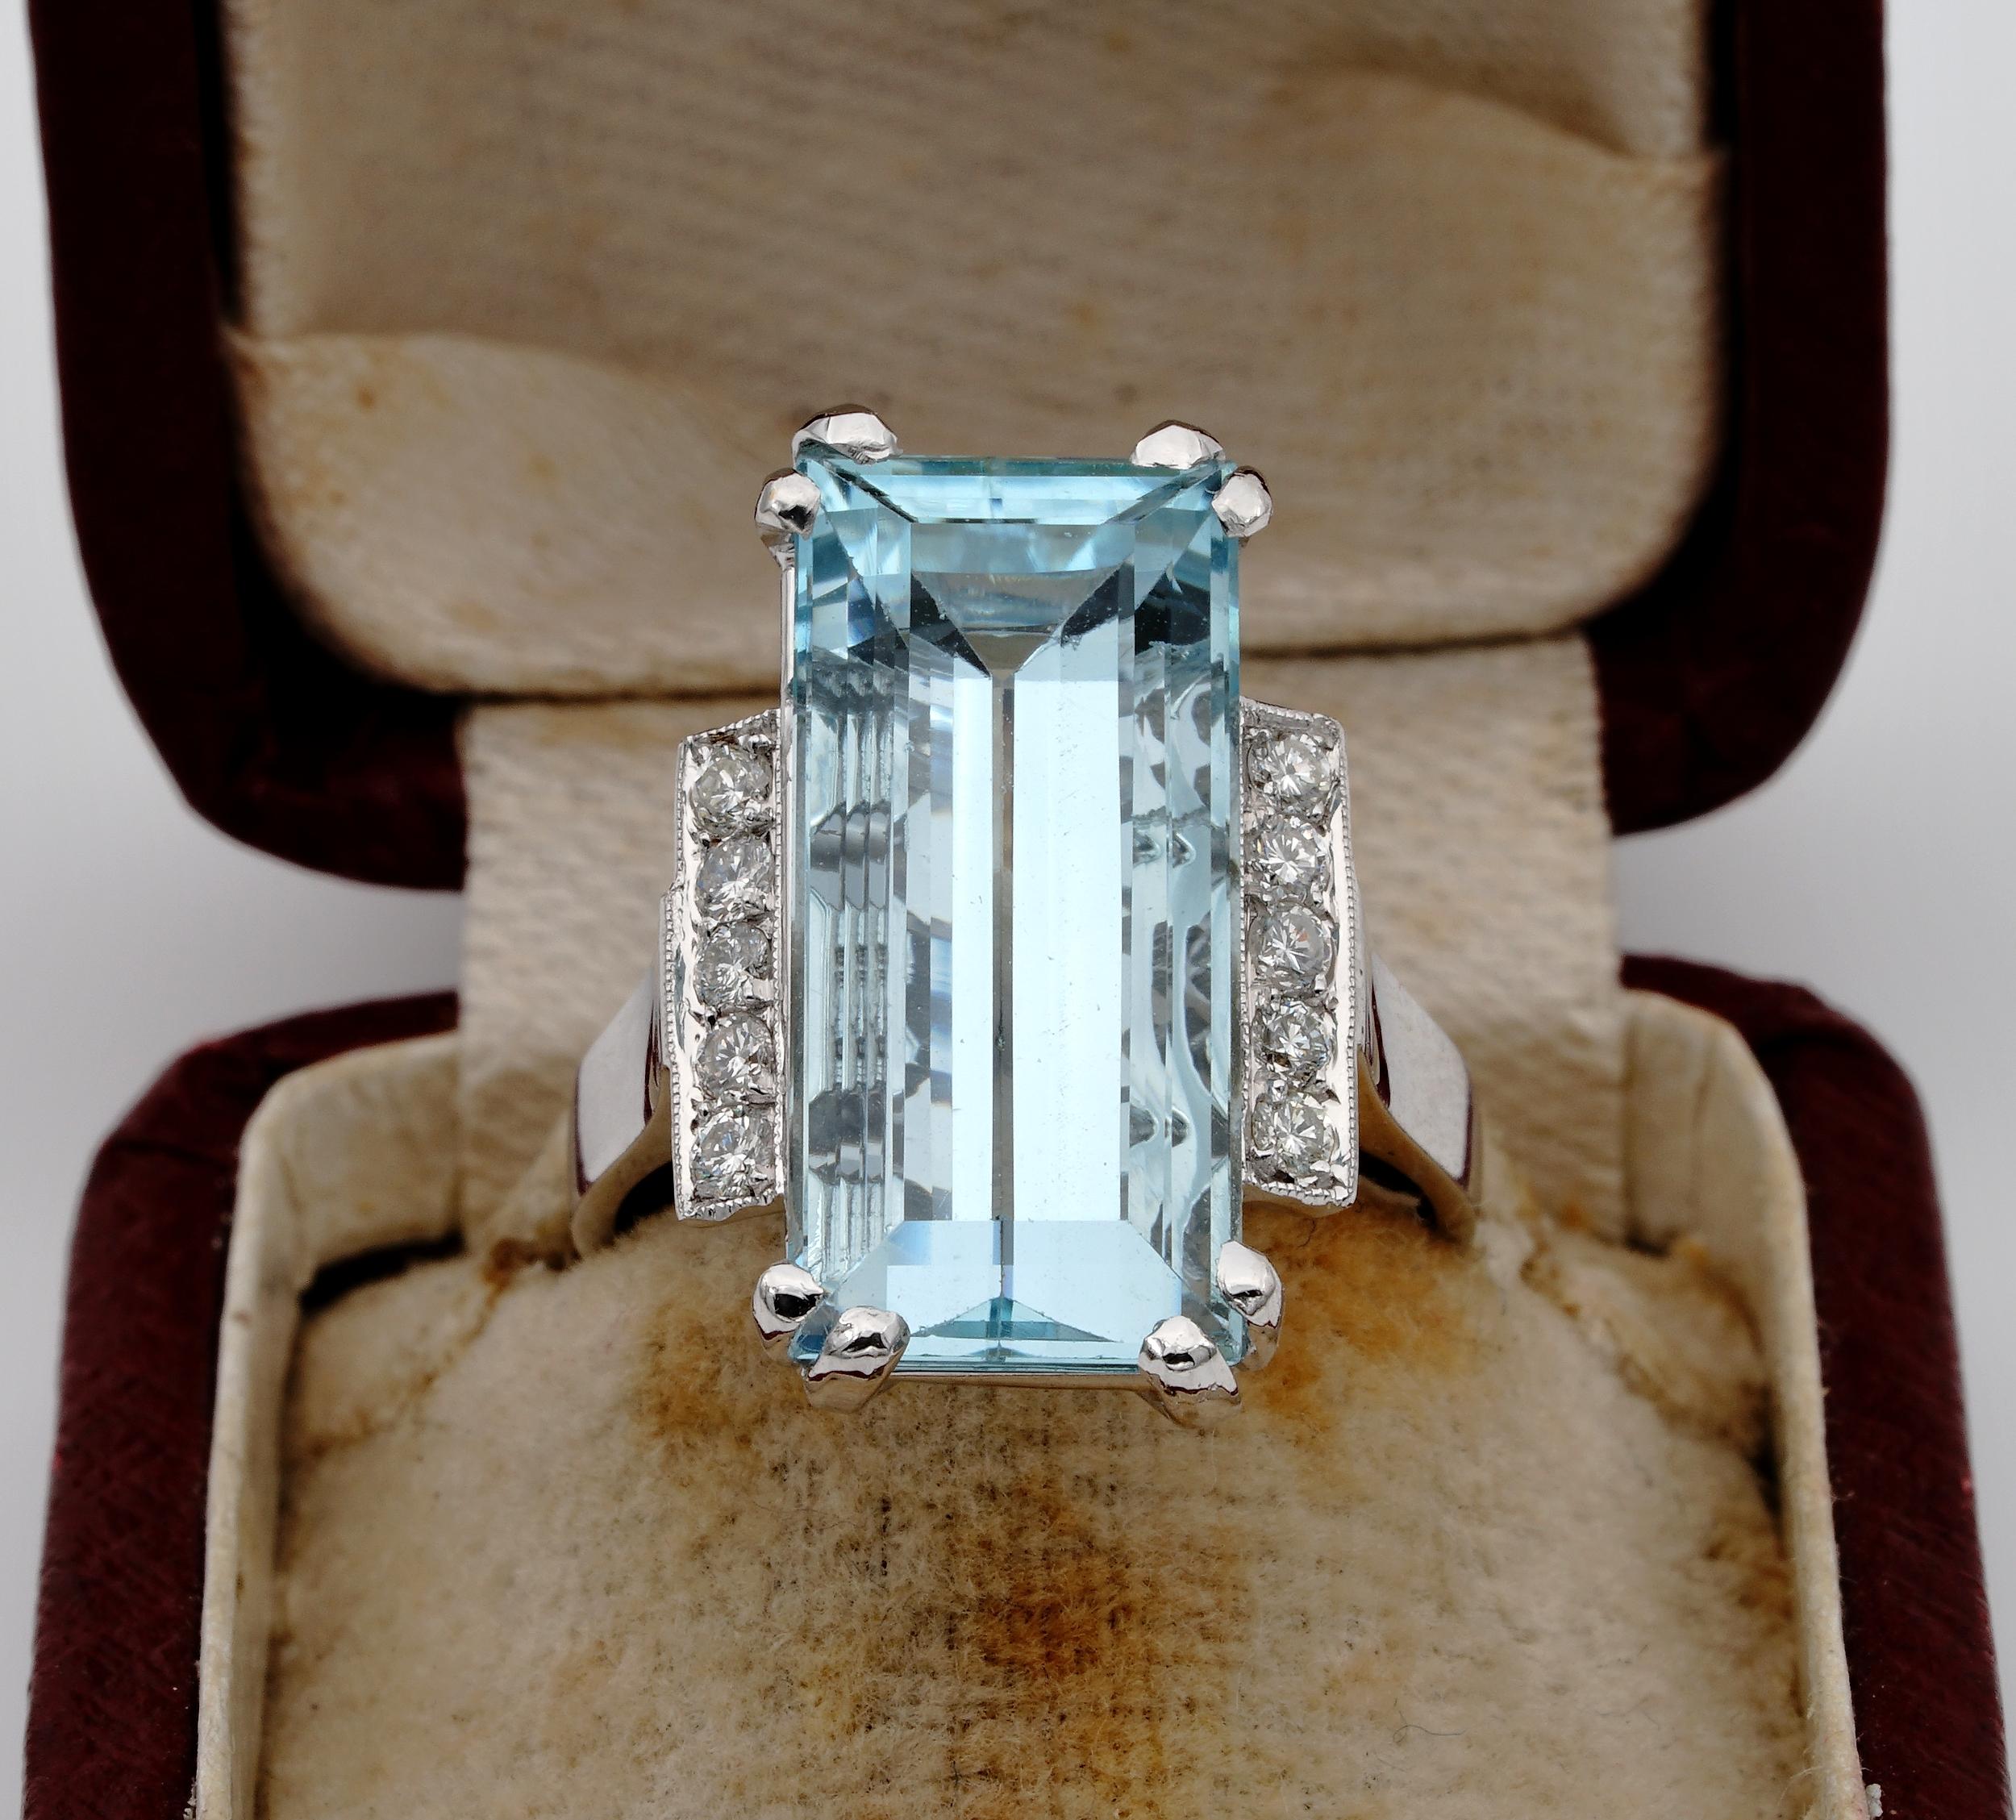 So Chic!

A stunning Aquamarine and Diamond vintage ring of singular elongated emerald cut complemented by Diamonds on sides on a classy step version; Aquamarine sits on a gorgeous pierced basket work
Timeless, classy style not fearing the time